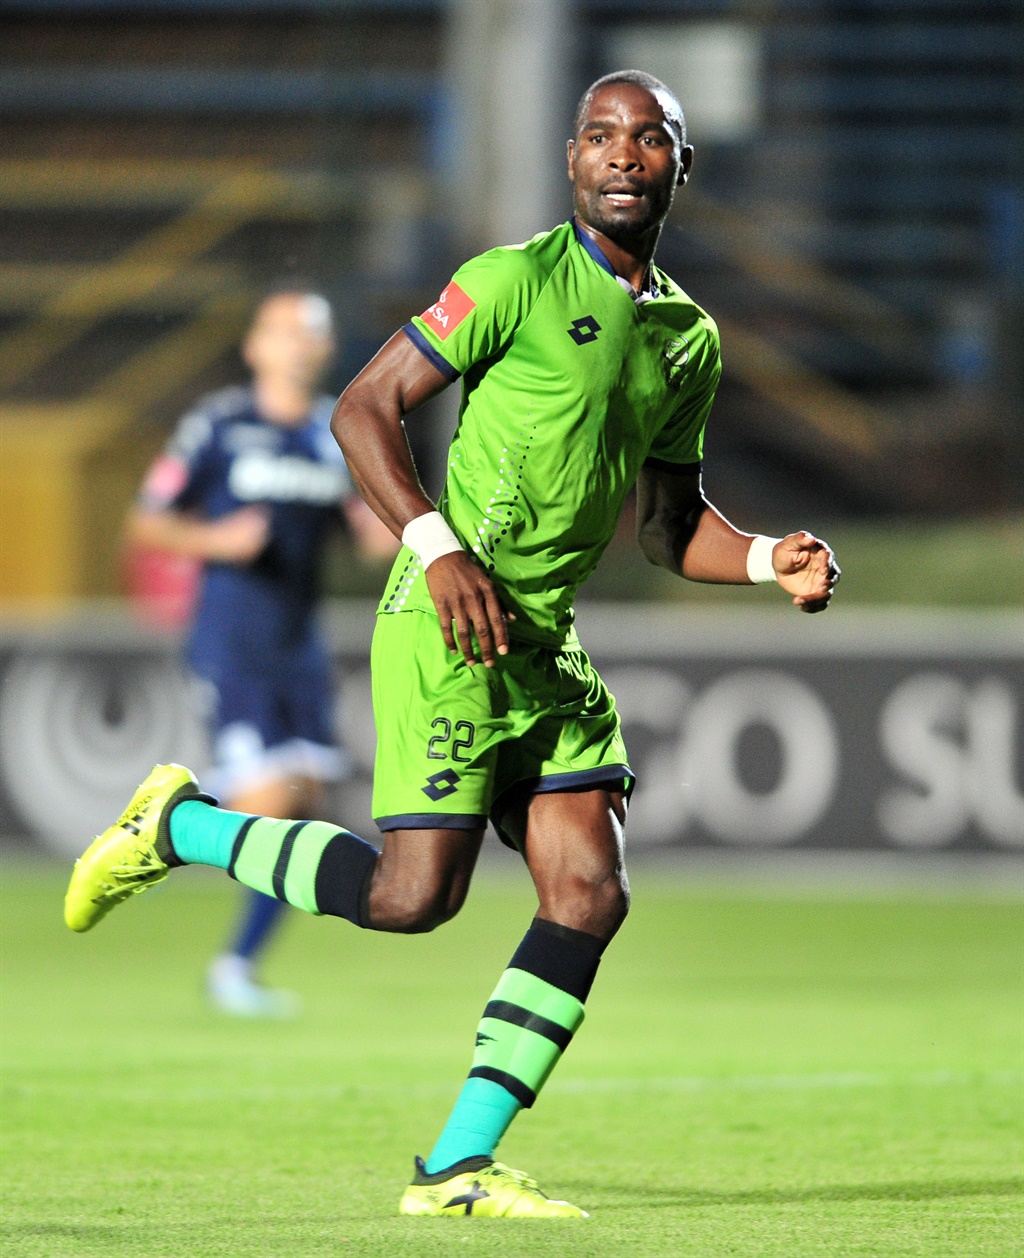 Robert N’gambi says they will fight for Platinum Stars to avoid relegation.